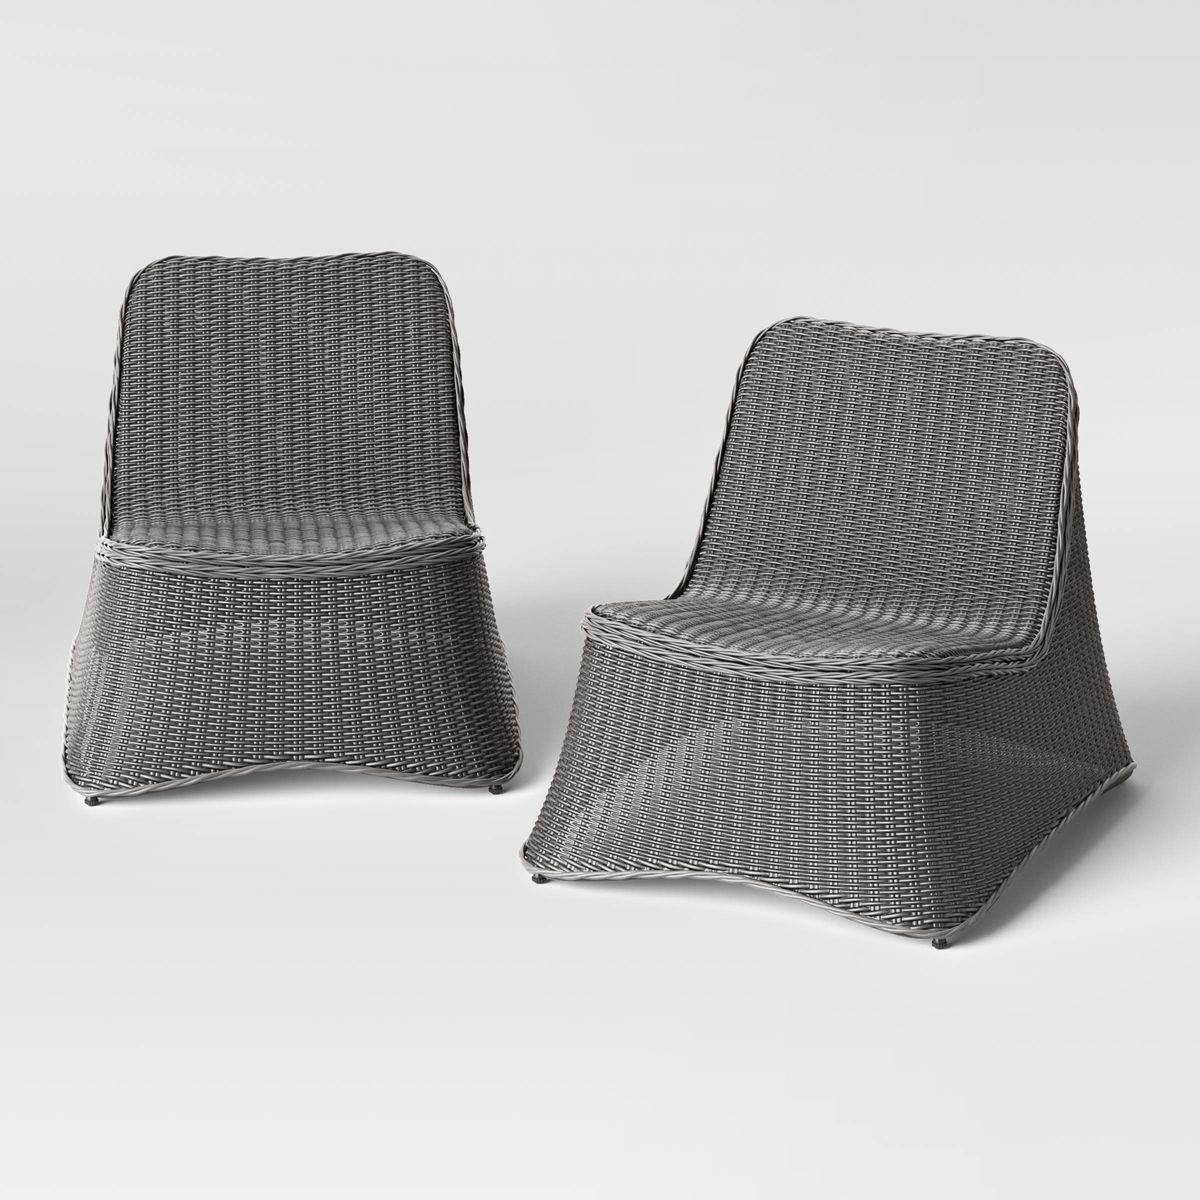 2pc Wexler Wicker Stacking Outdoor Patio Chairs, Armless Chairs Gray - Threshold™ | Target